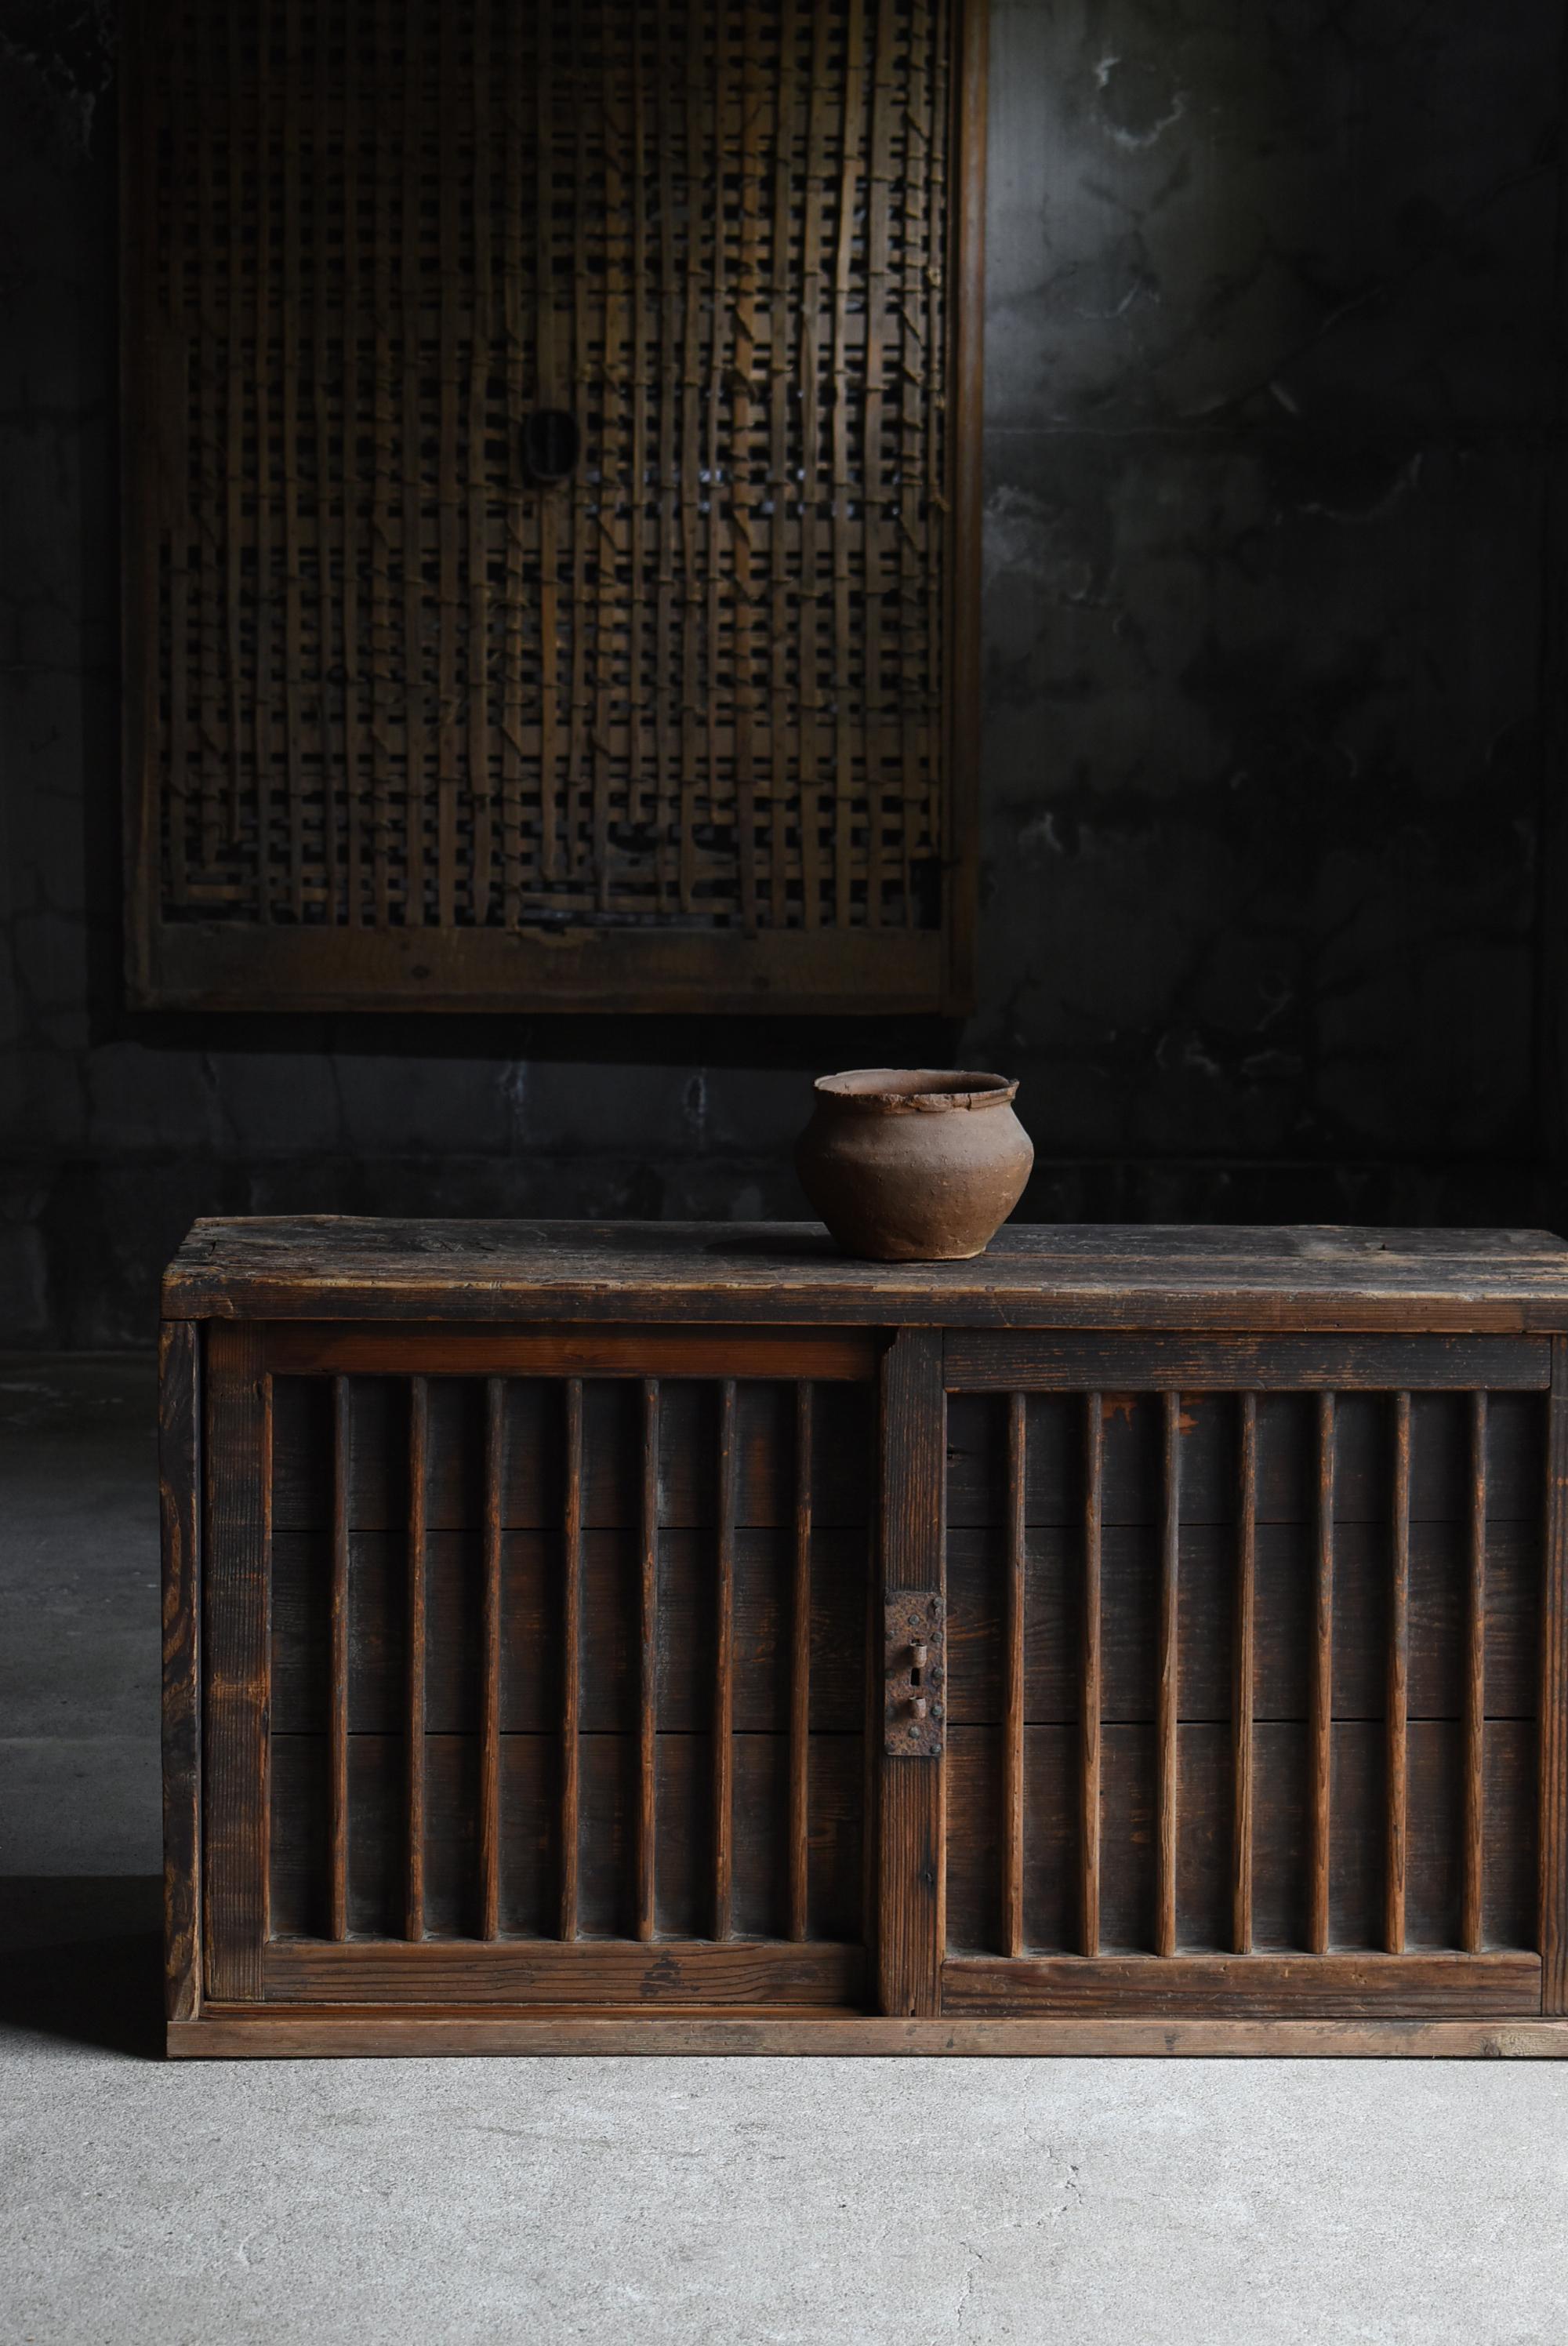 This is a very old Tansu made in Japan.
This furniture was made in the Meiji era. (1860s-1900s).
The material is cedar wood.

The design is simple and rustic.
There is no unnecessary design at all, it is the ultimate simplicity.
The lattice door is